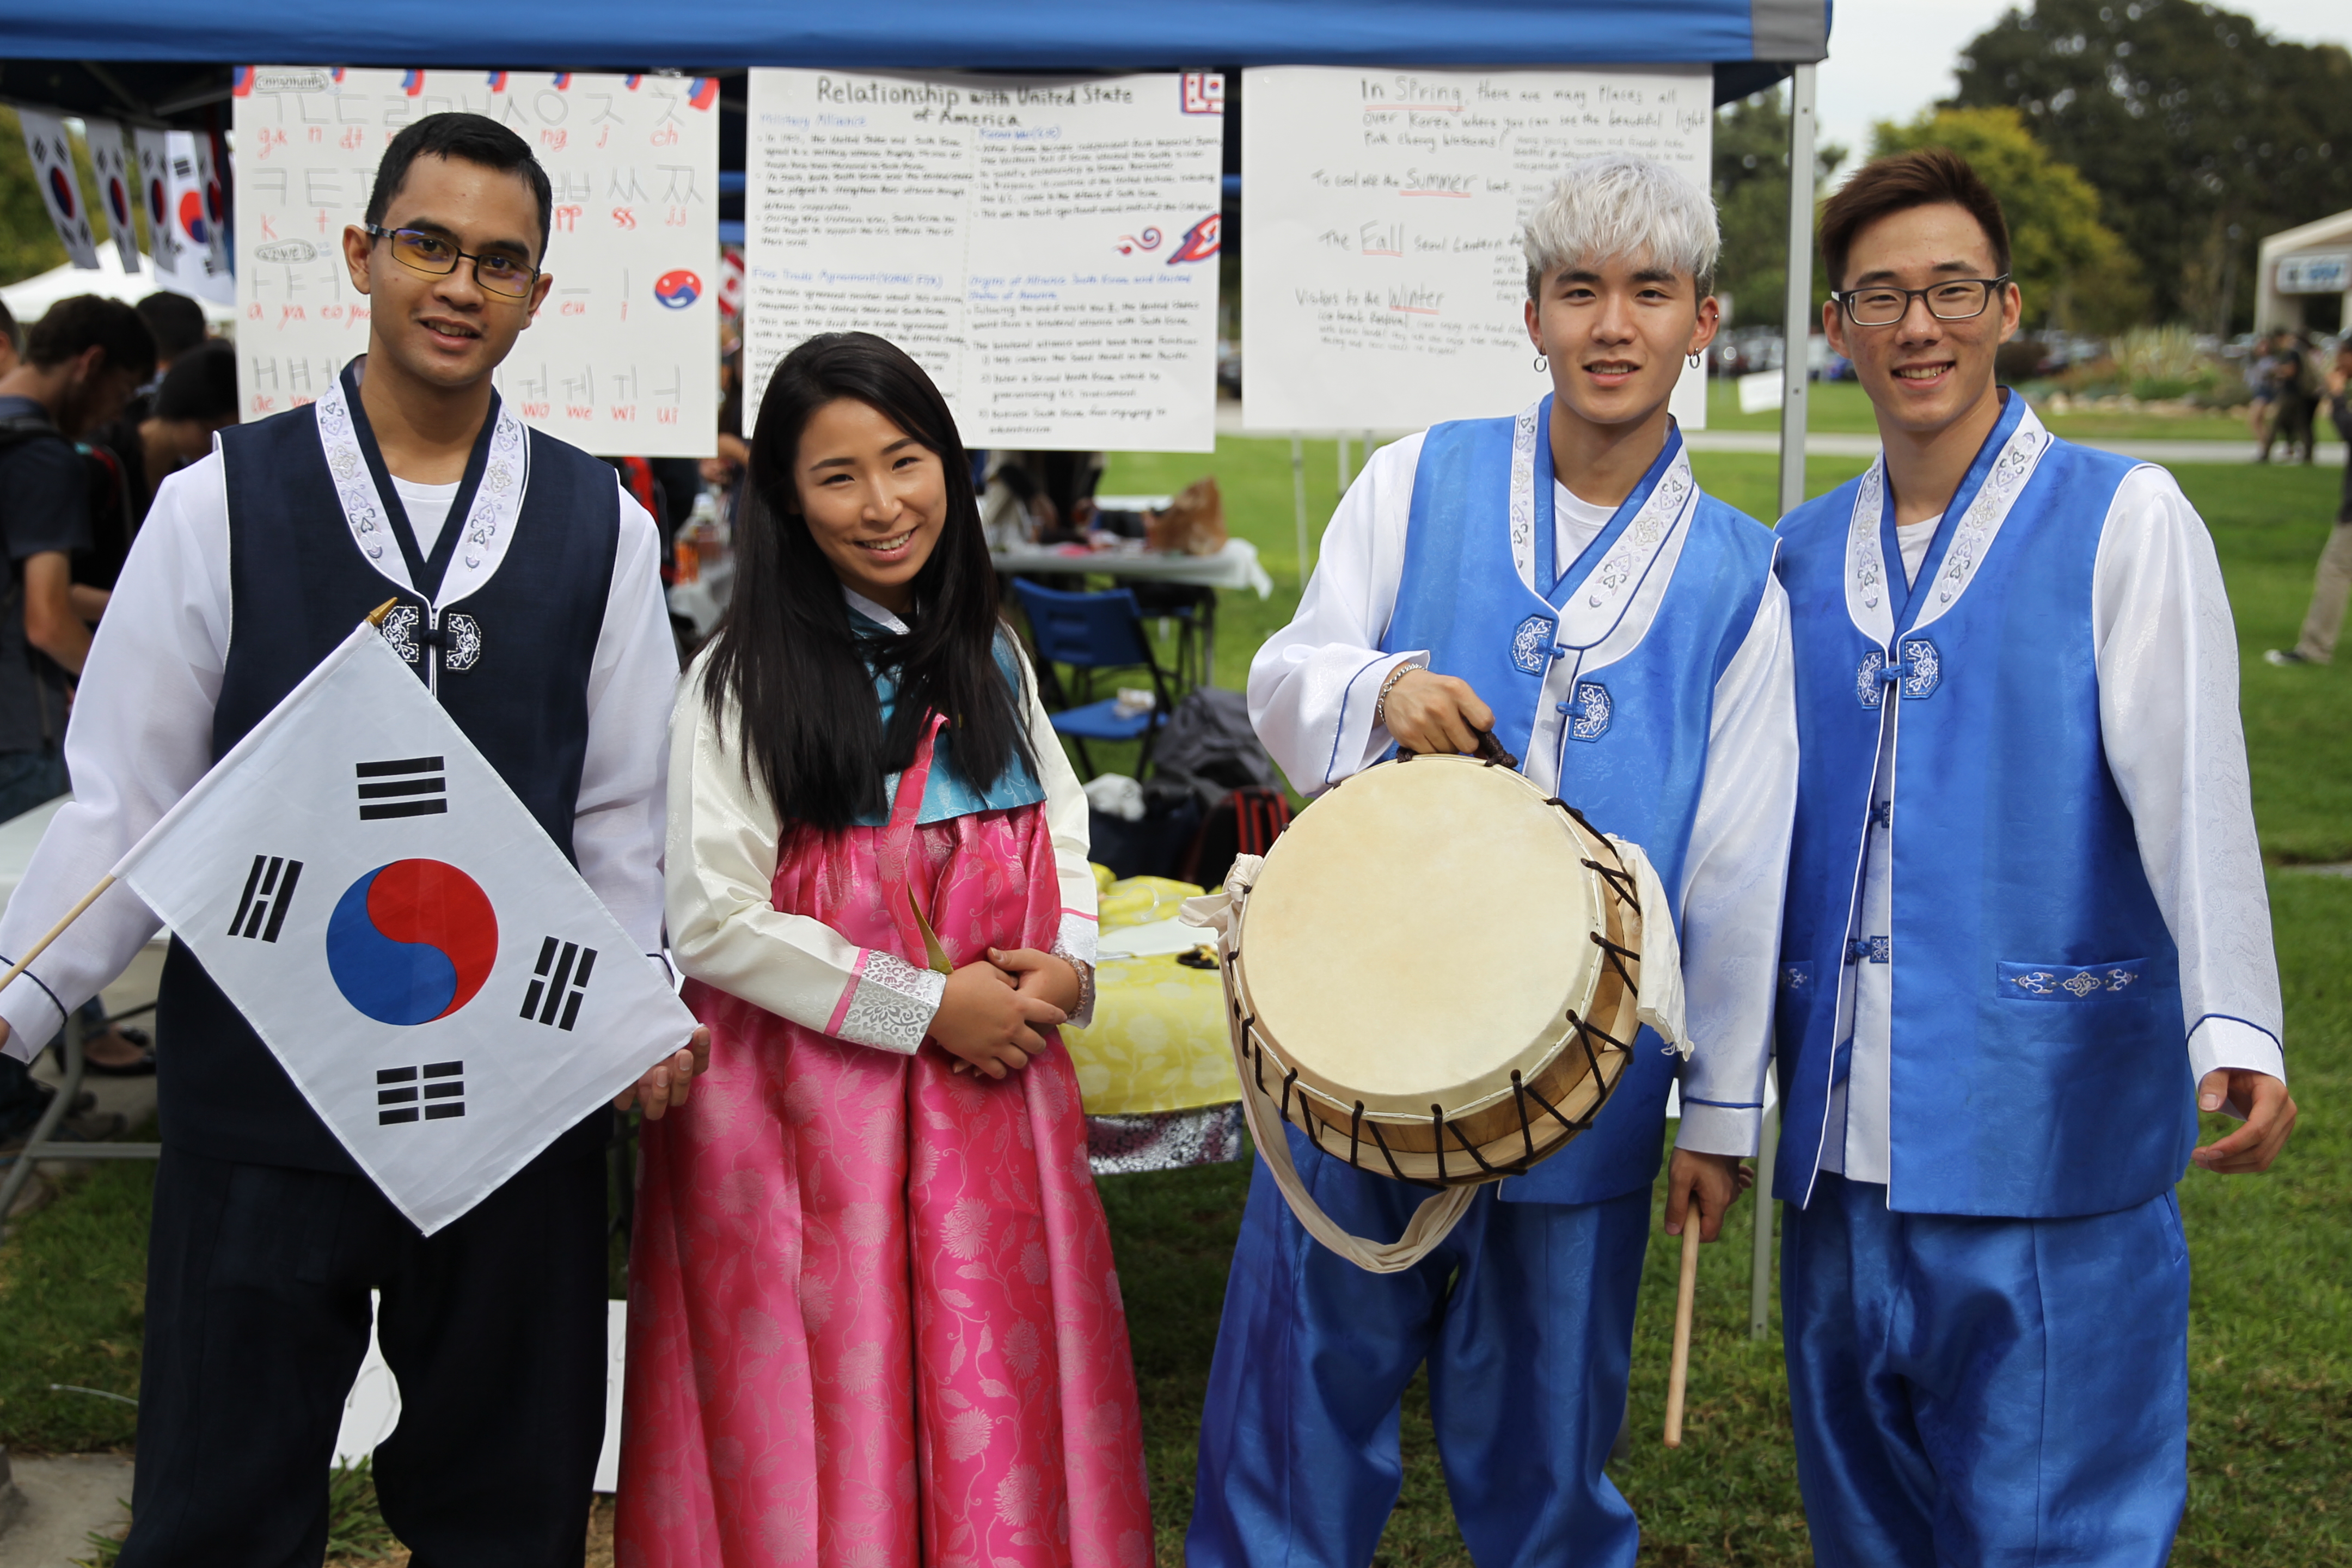 Photo showing students at cultural event